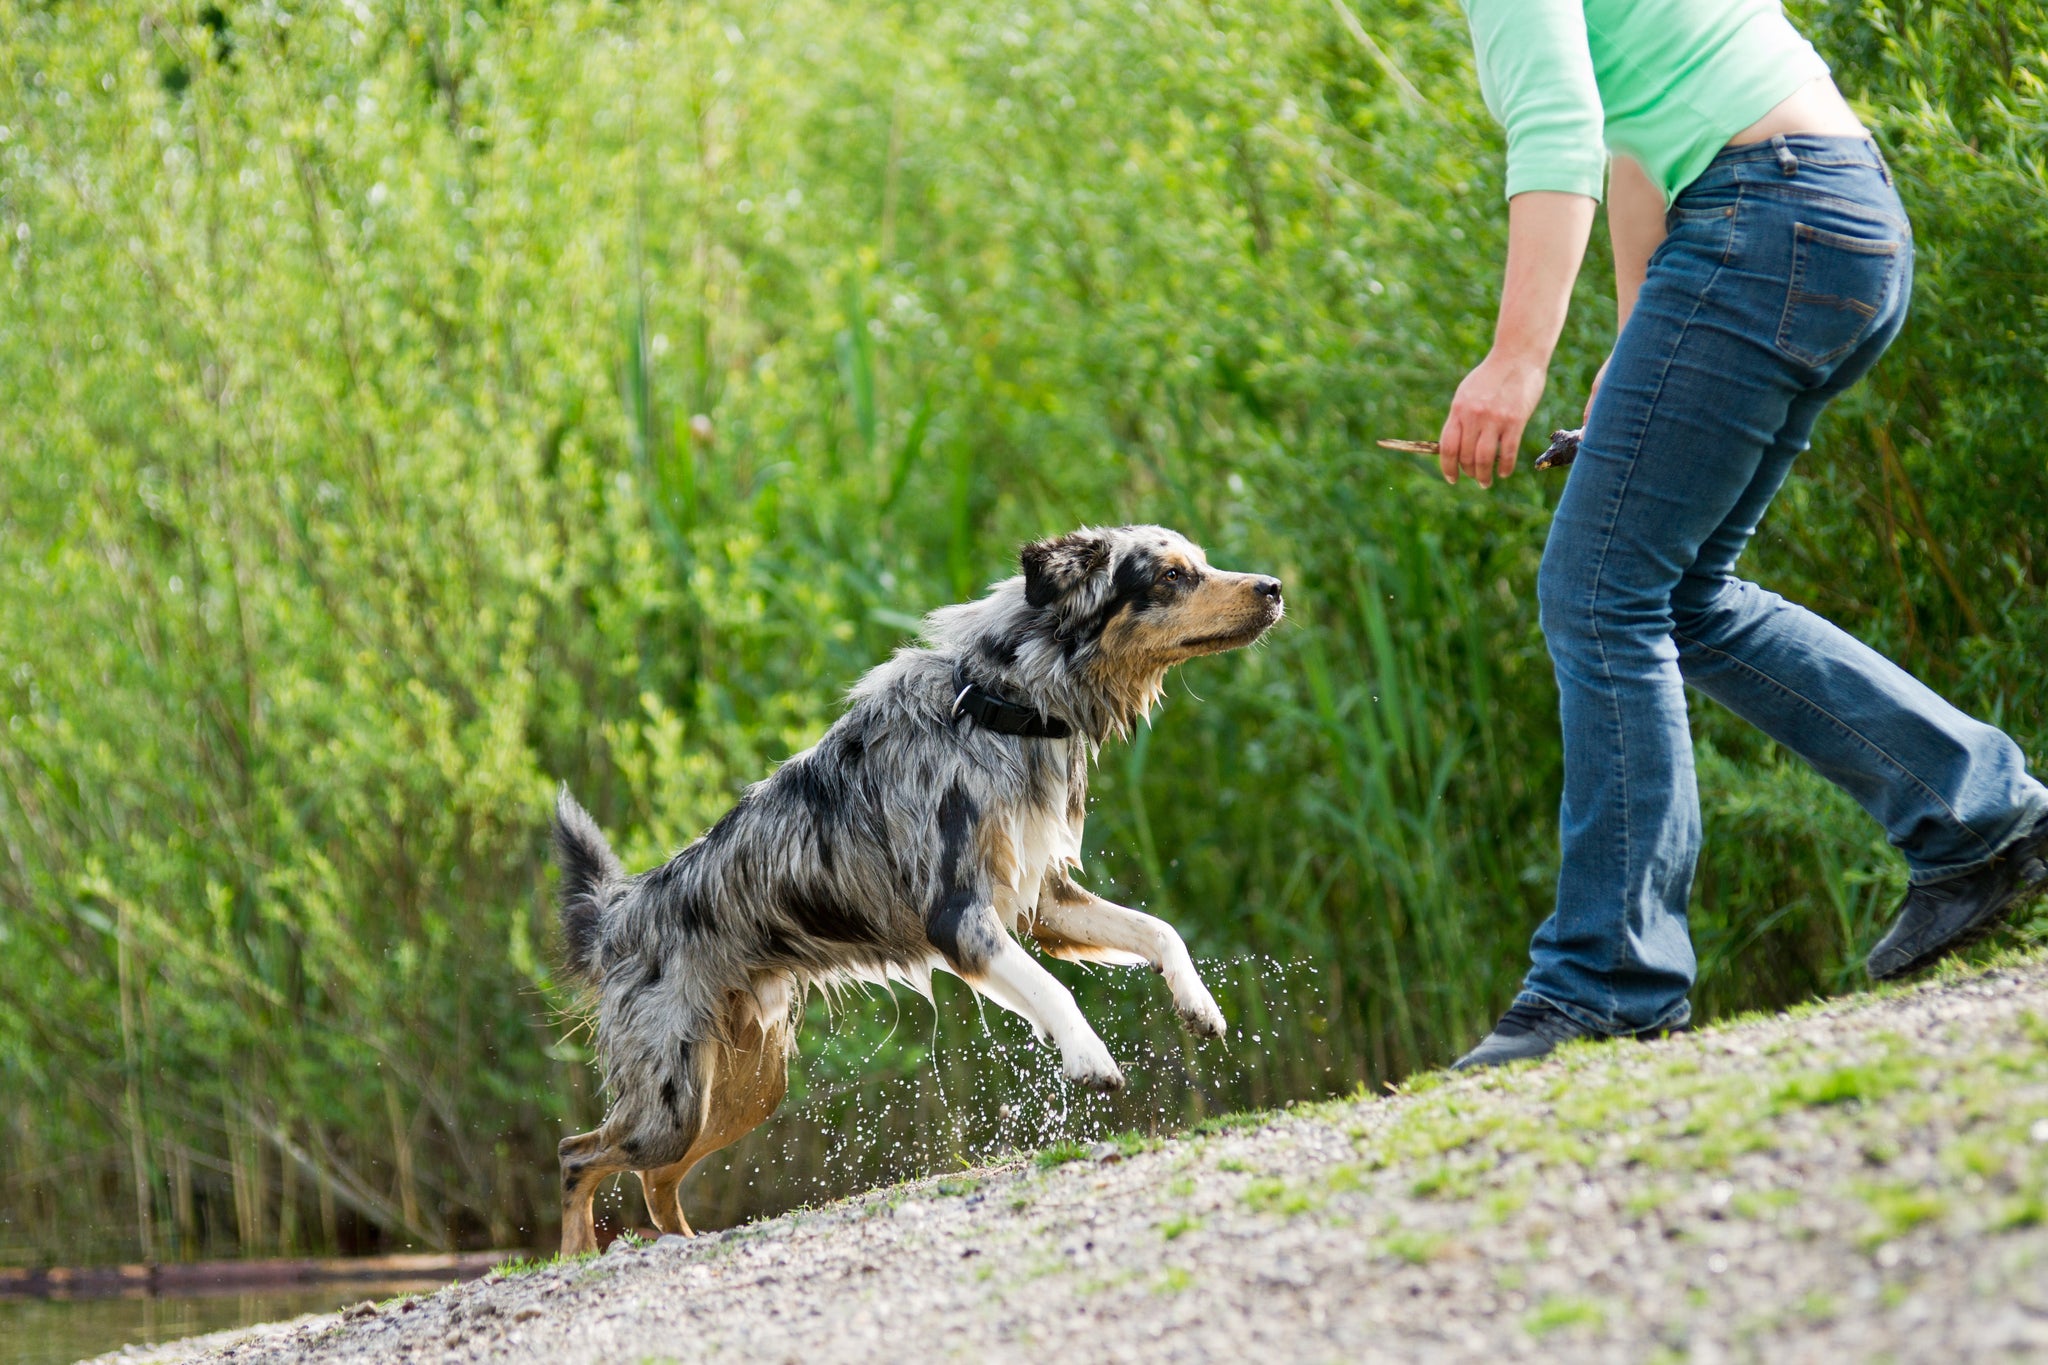 The Importance of Regular Checkups: Early Cancer Detection and Better Prognosis for Your Dog